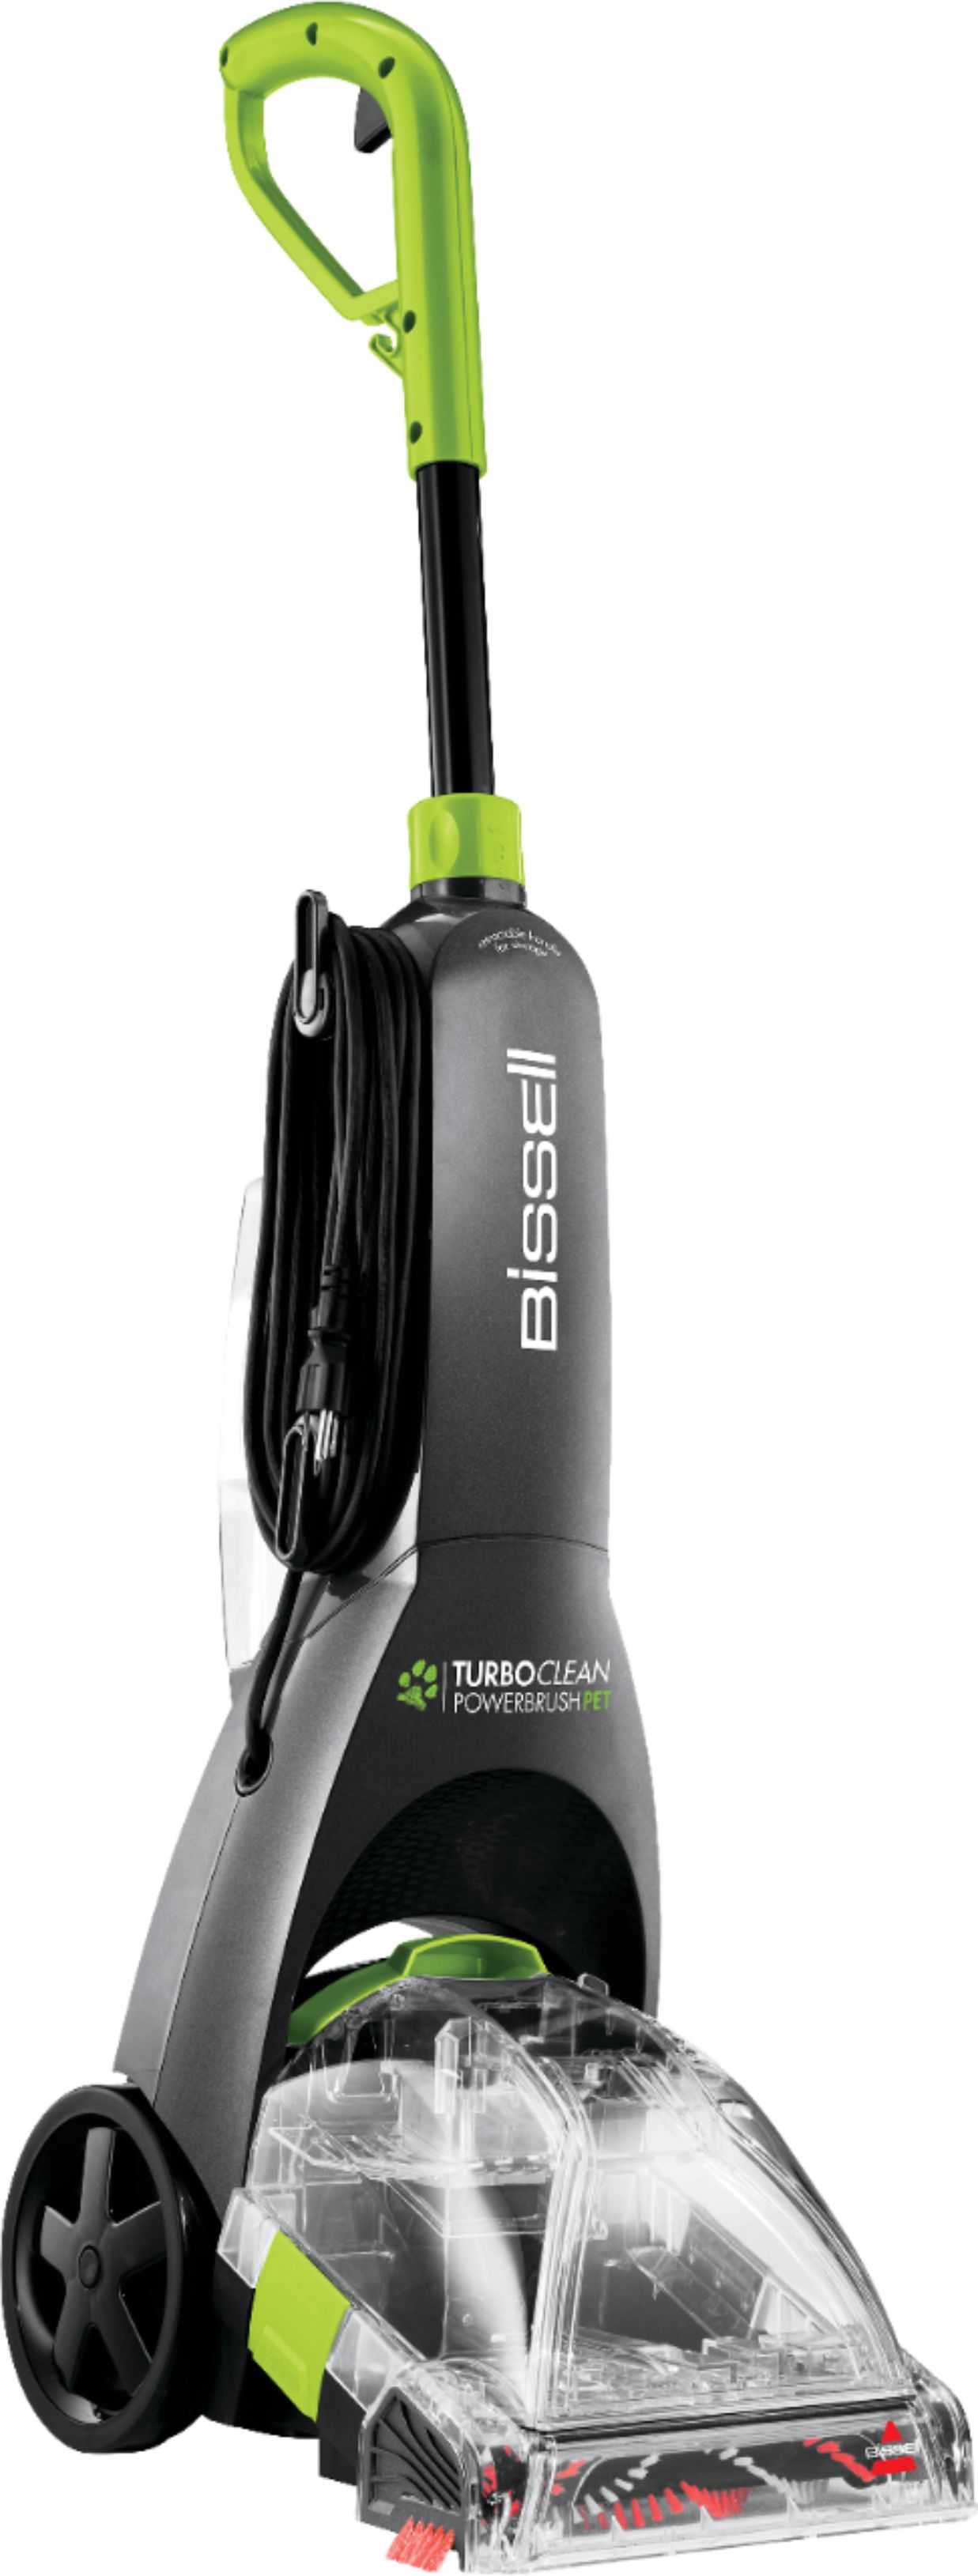 Angle View: BISSELL - TurboClean™ PowerBrush Pet Carpet Cleaner - Titanium with ChaCha Lime Accents